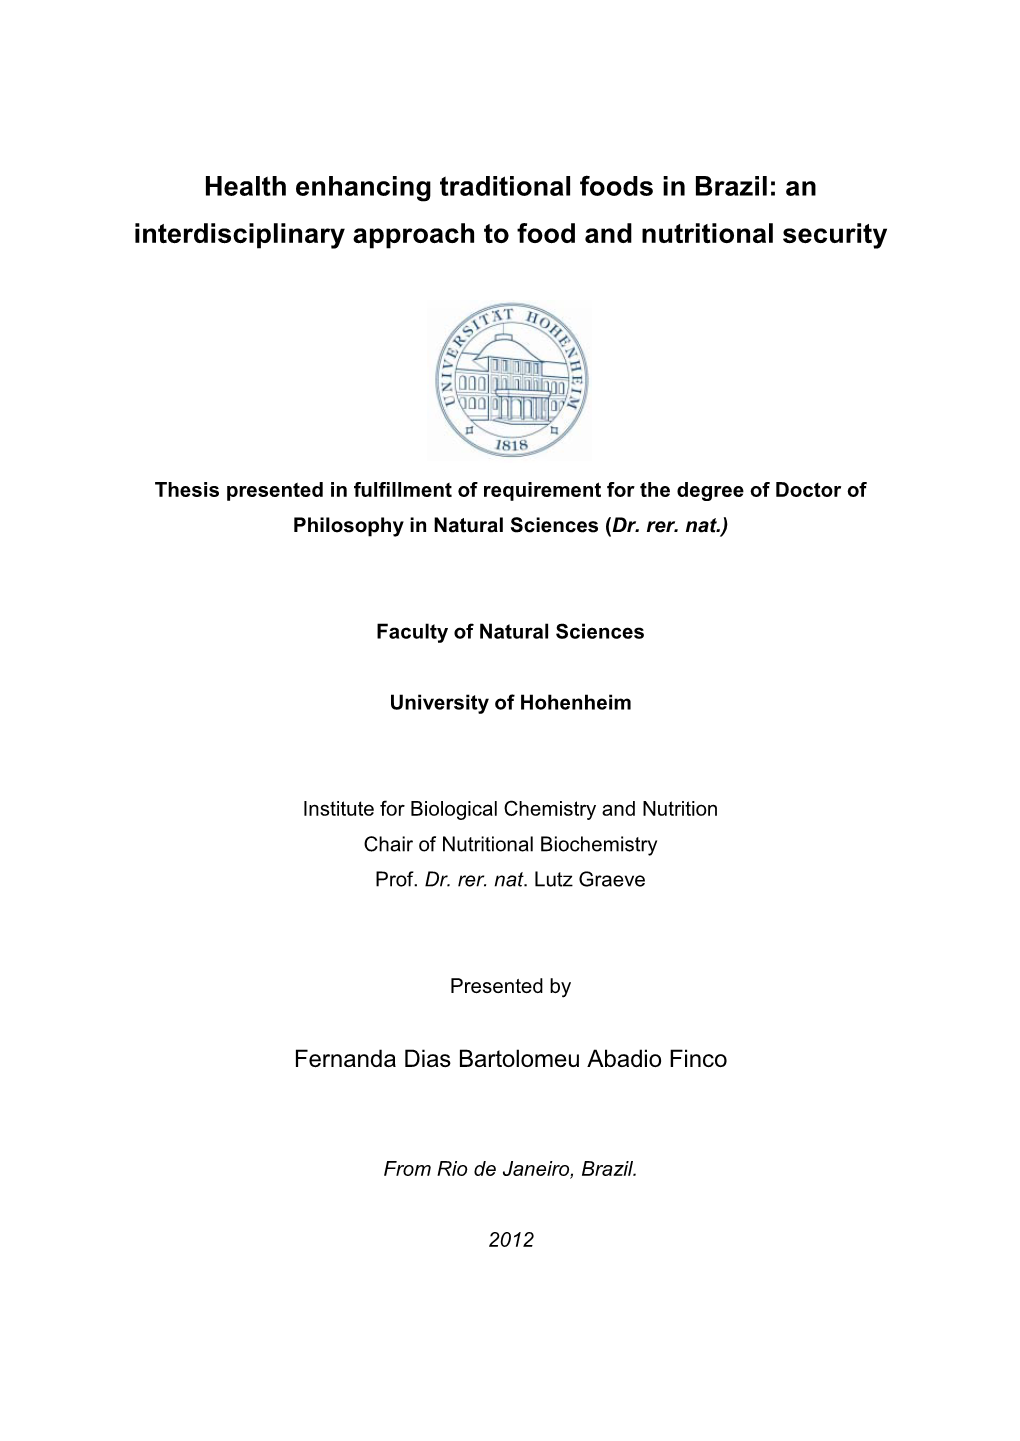 An Interdisciplinary Approach to Food and Nutritional Security